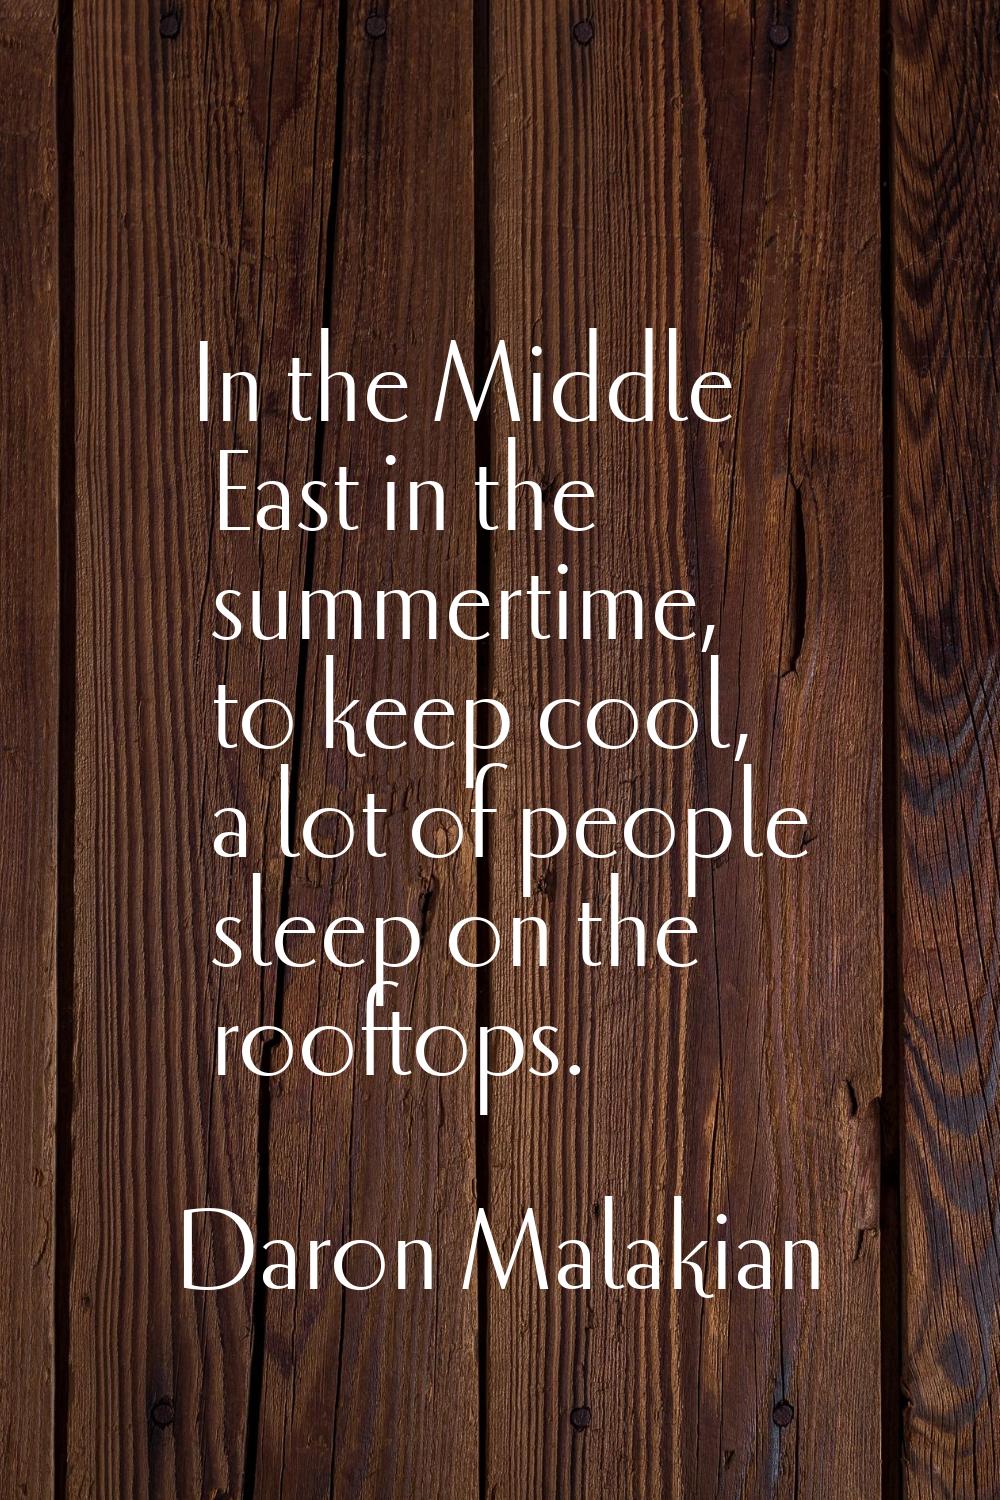 In the Middle East in the summertime, to keep cool, a lot of people sleep on the rooftops.